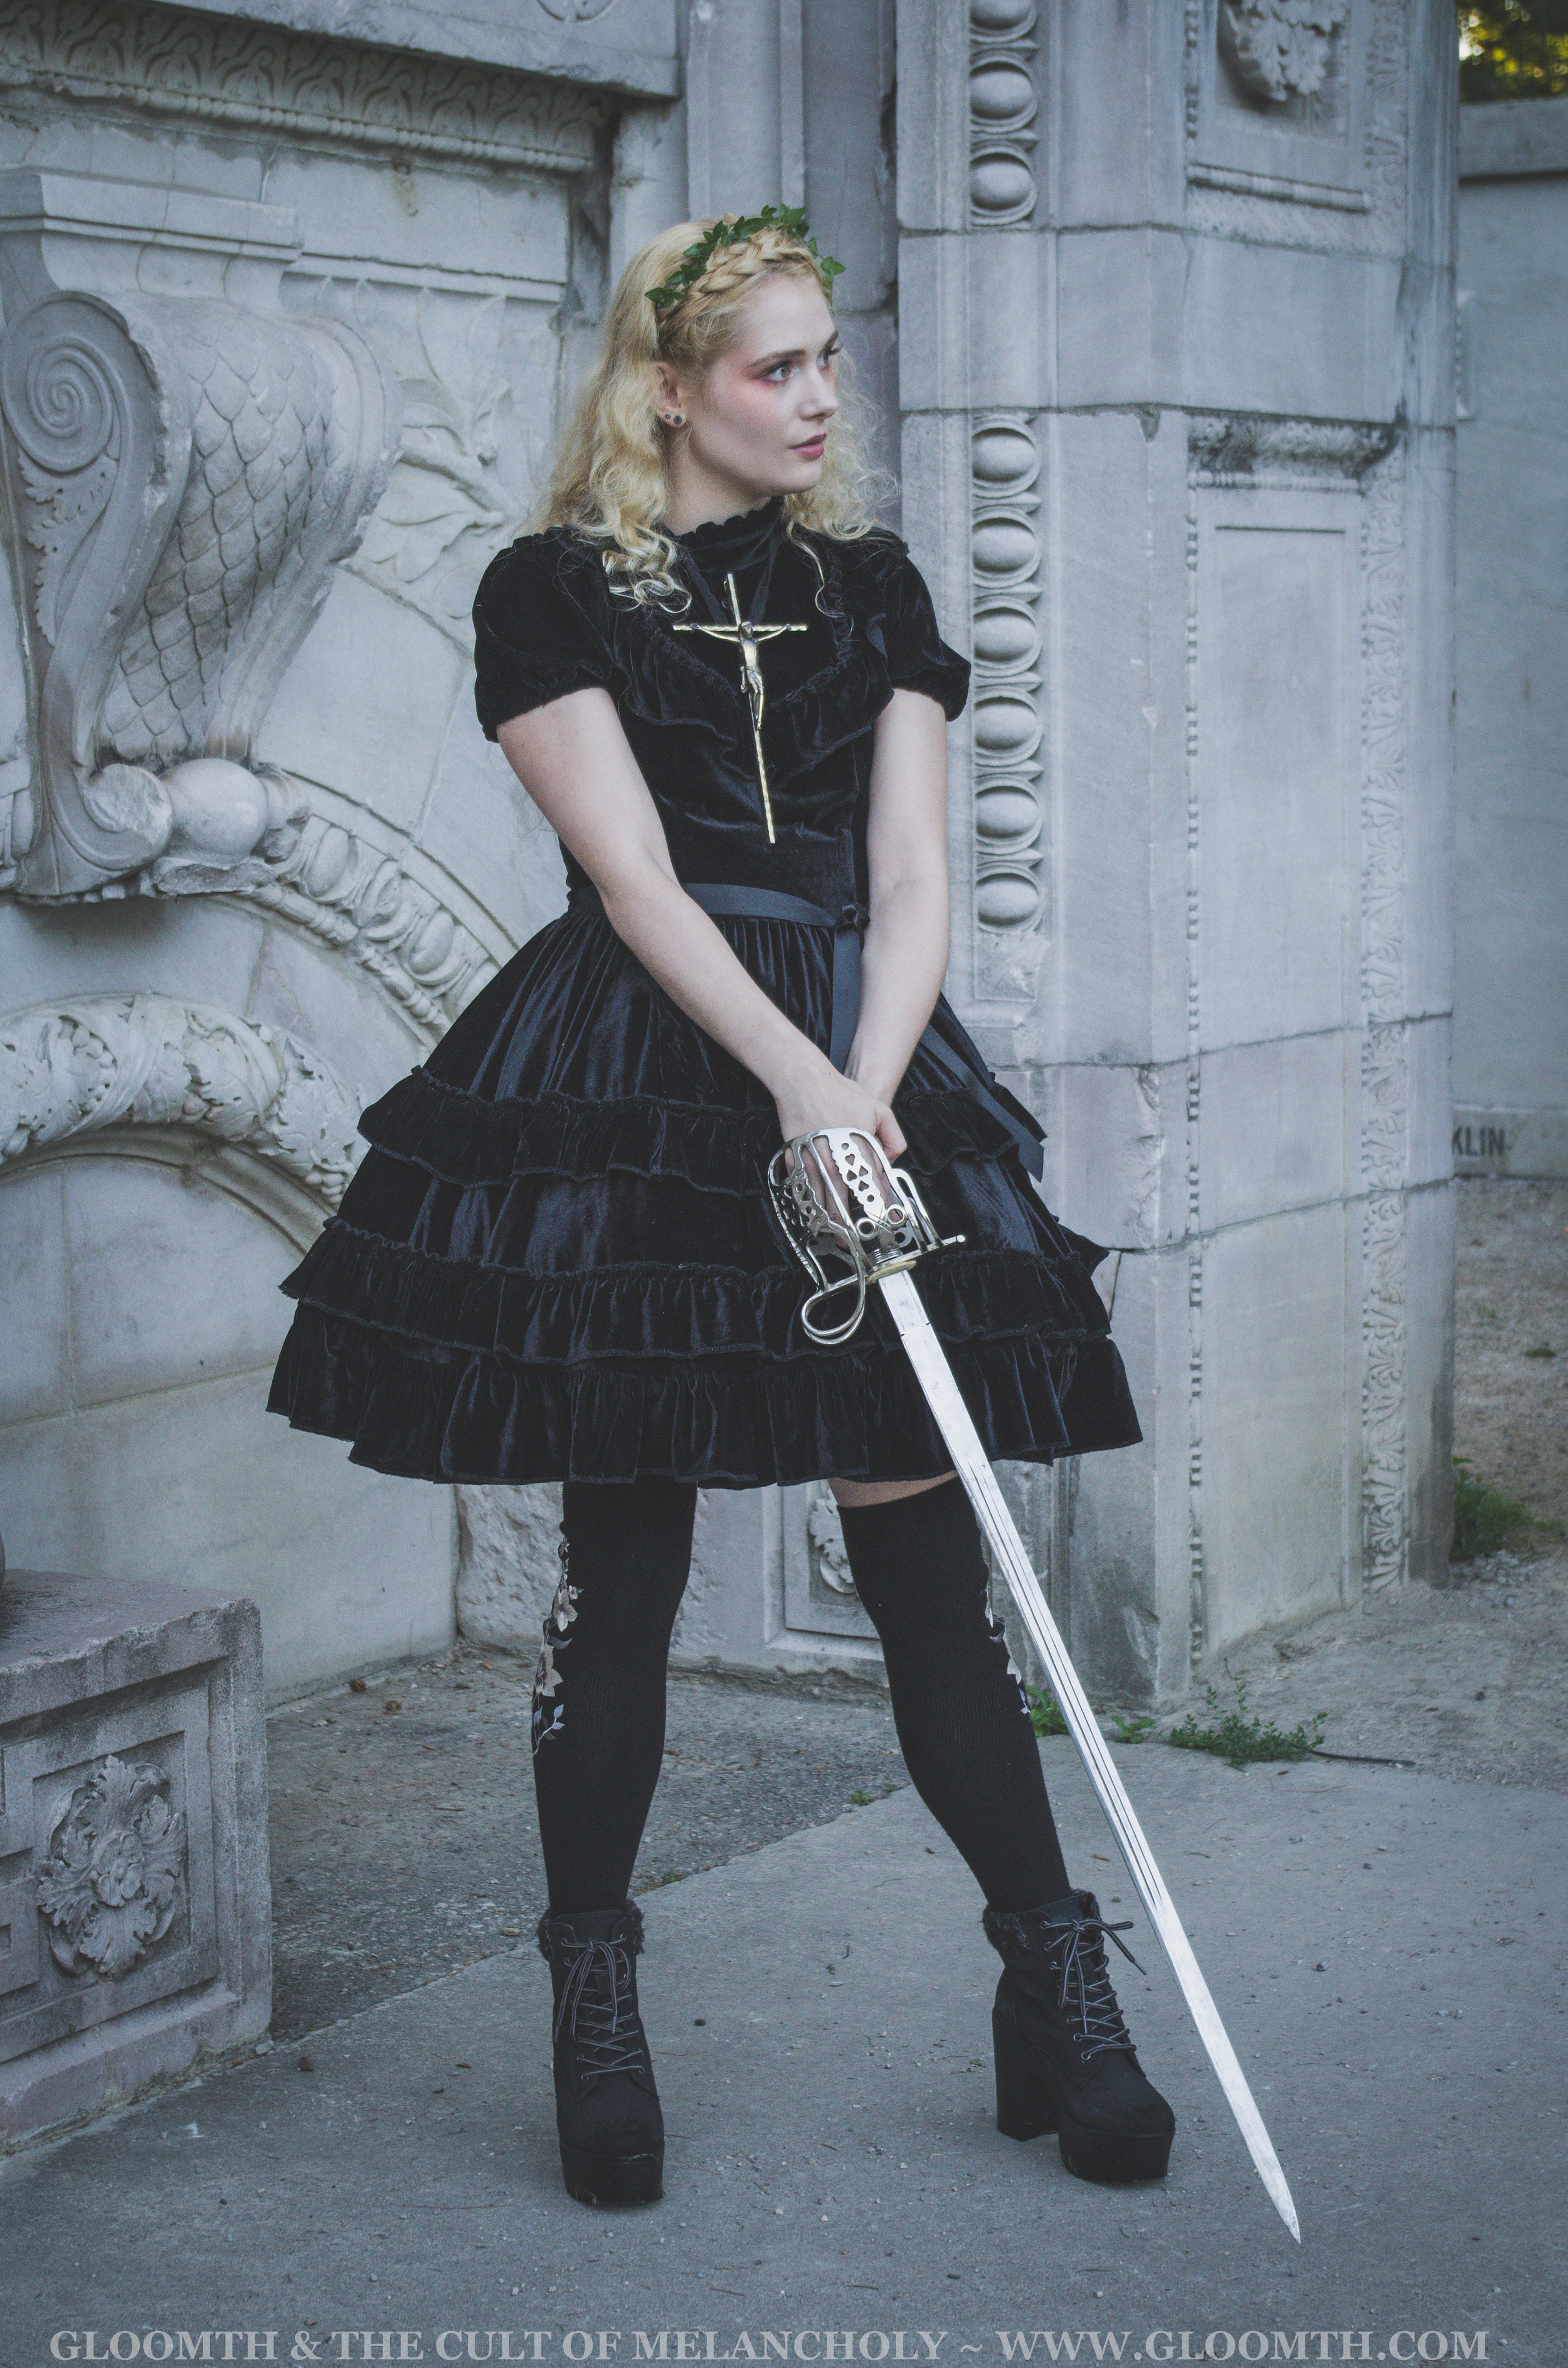 joan of arc with velvet dress and sword editorial